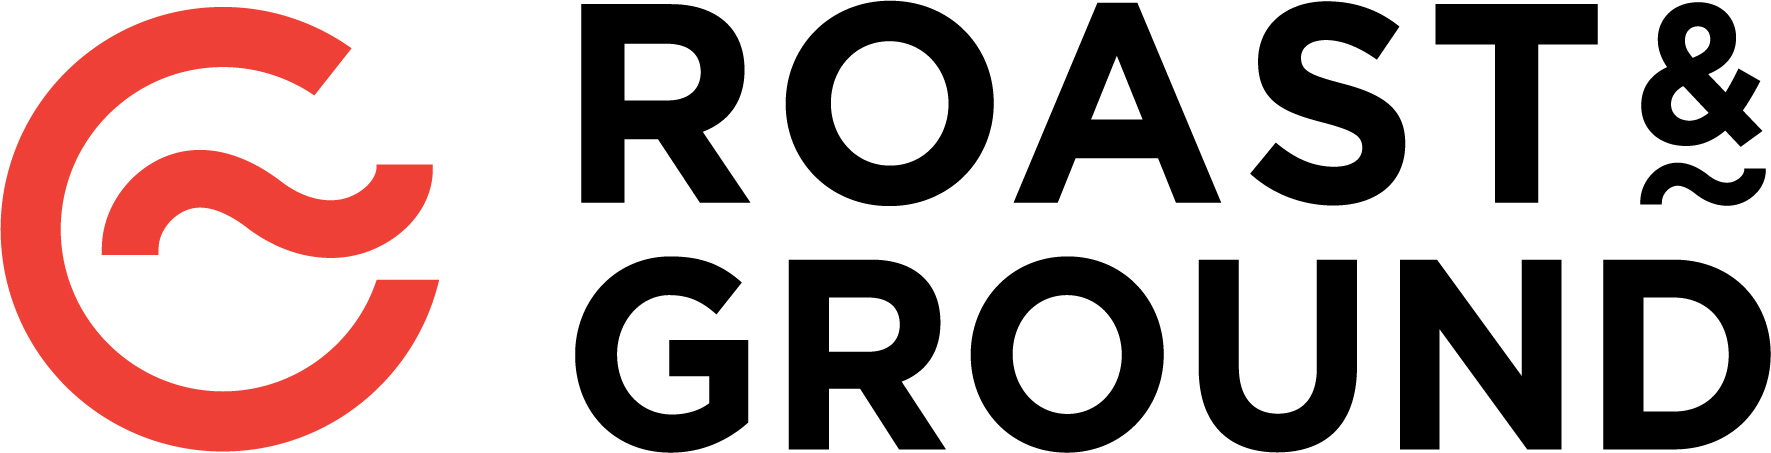 logo for Roast & Ground Limited